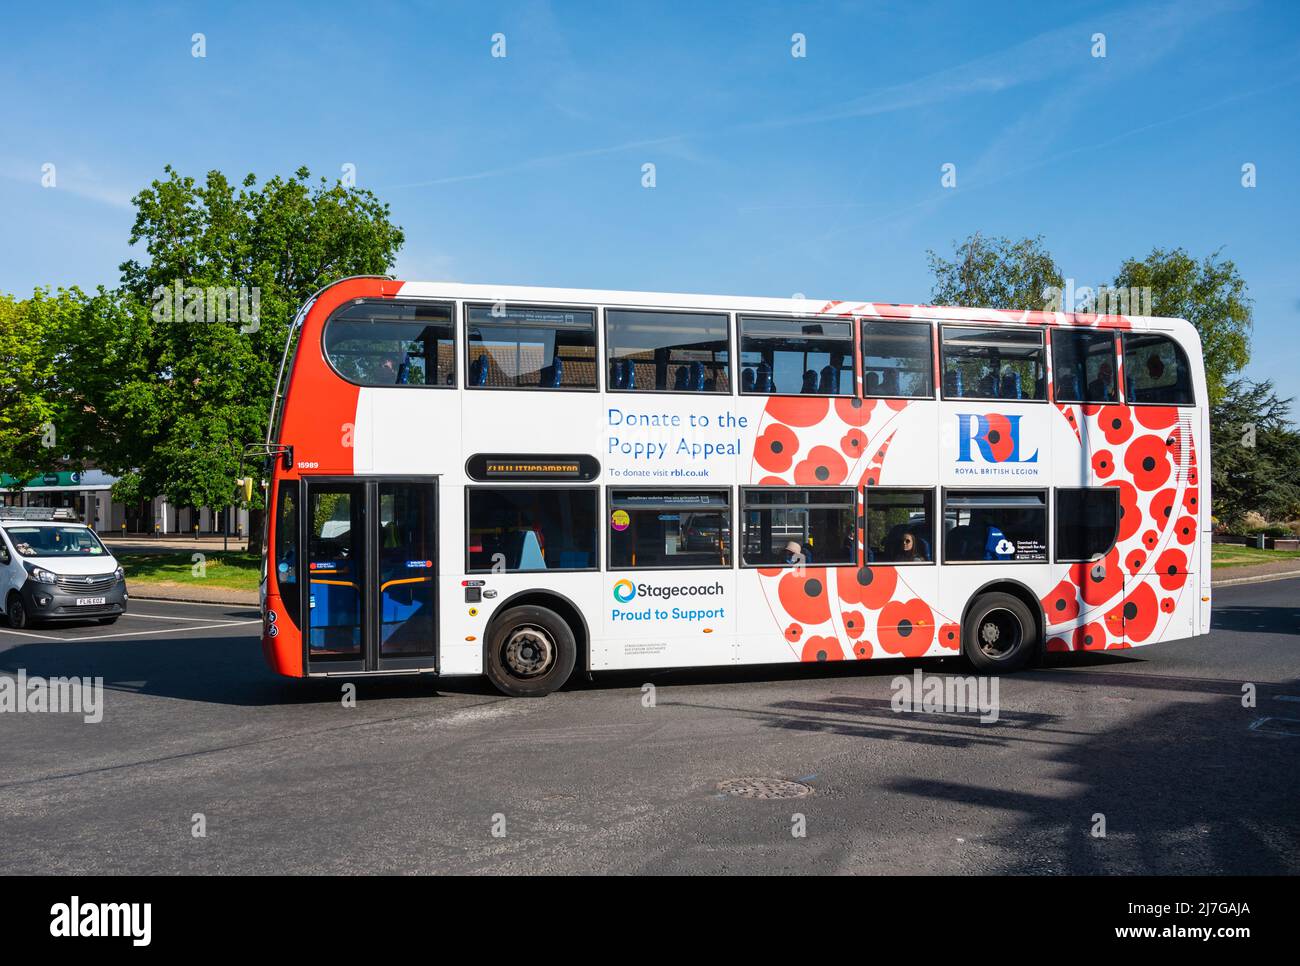 700 Coastliner Stagecoach bus painted in red & white livery with poppies to show support for 'Proud to donate' poppy appeal, Royal British Legion, UK. Stock Photo